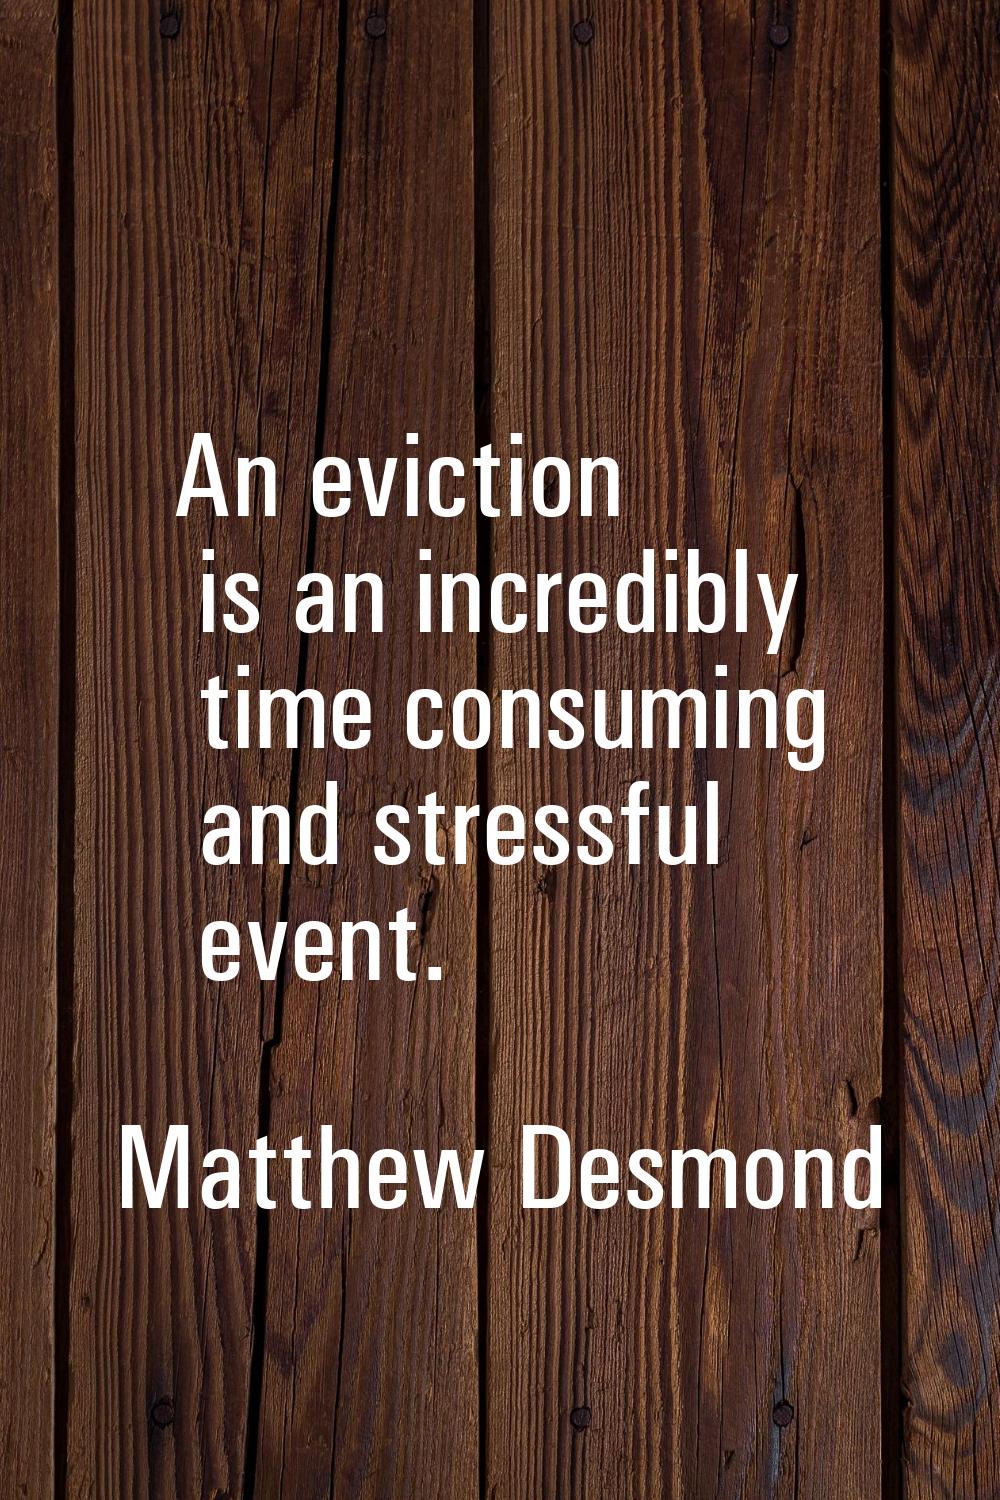 An eviction is an incredibly time consuming and stressful event.